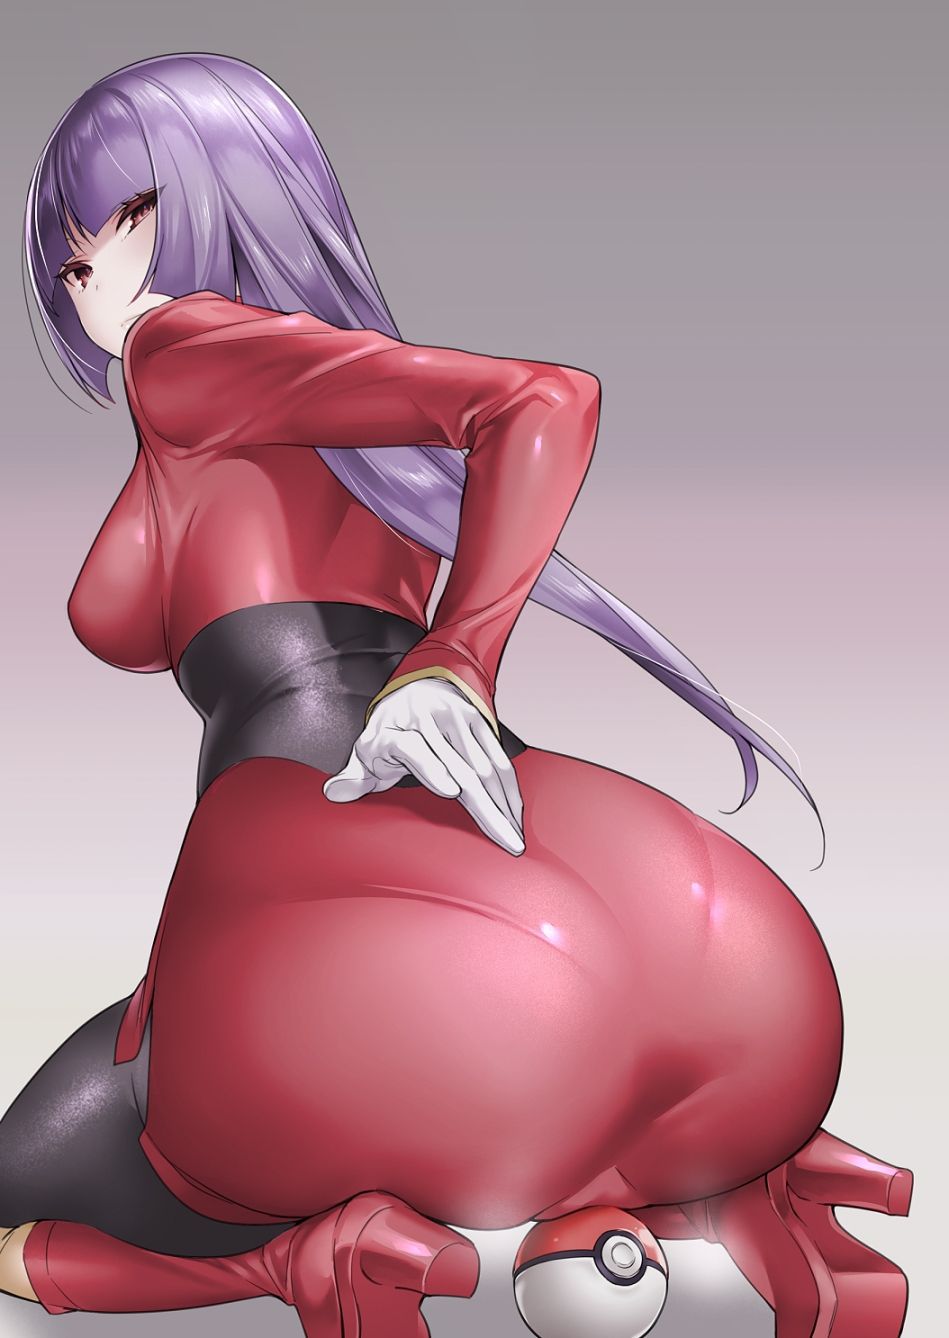 【Secondary Erotic】 Here is an erotic image of a girl wearing a tight costume so tight that you can see the panty line 4